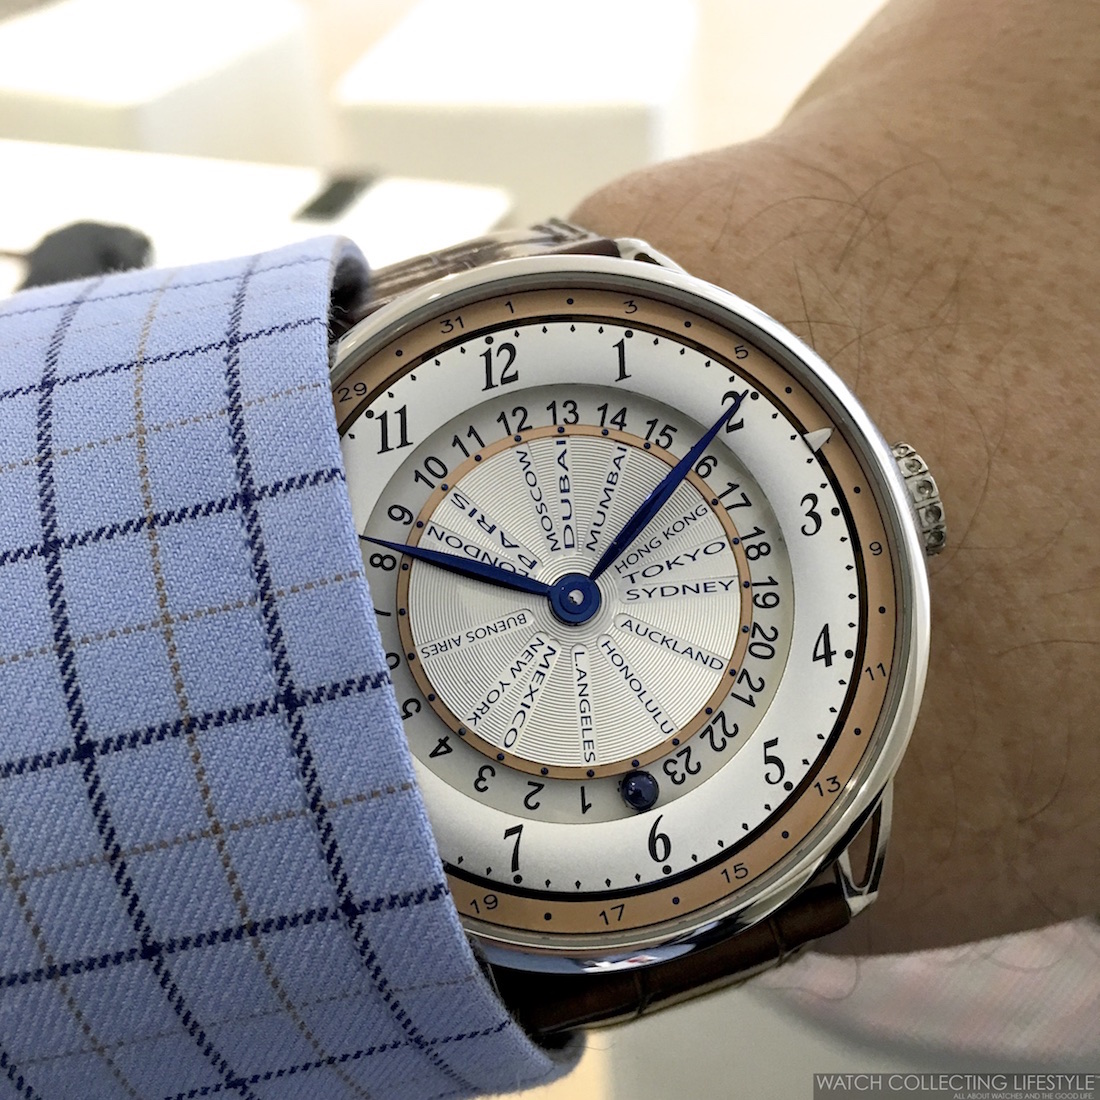 SIHH 2016: Presenting the new De Bethune DB25 World Traveller. Hands-on ...